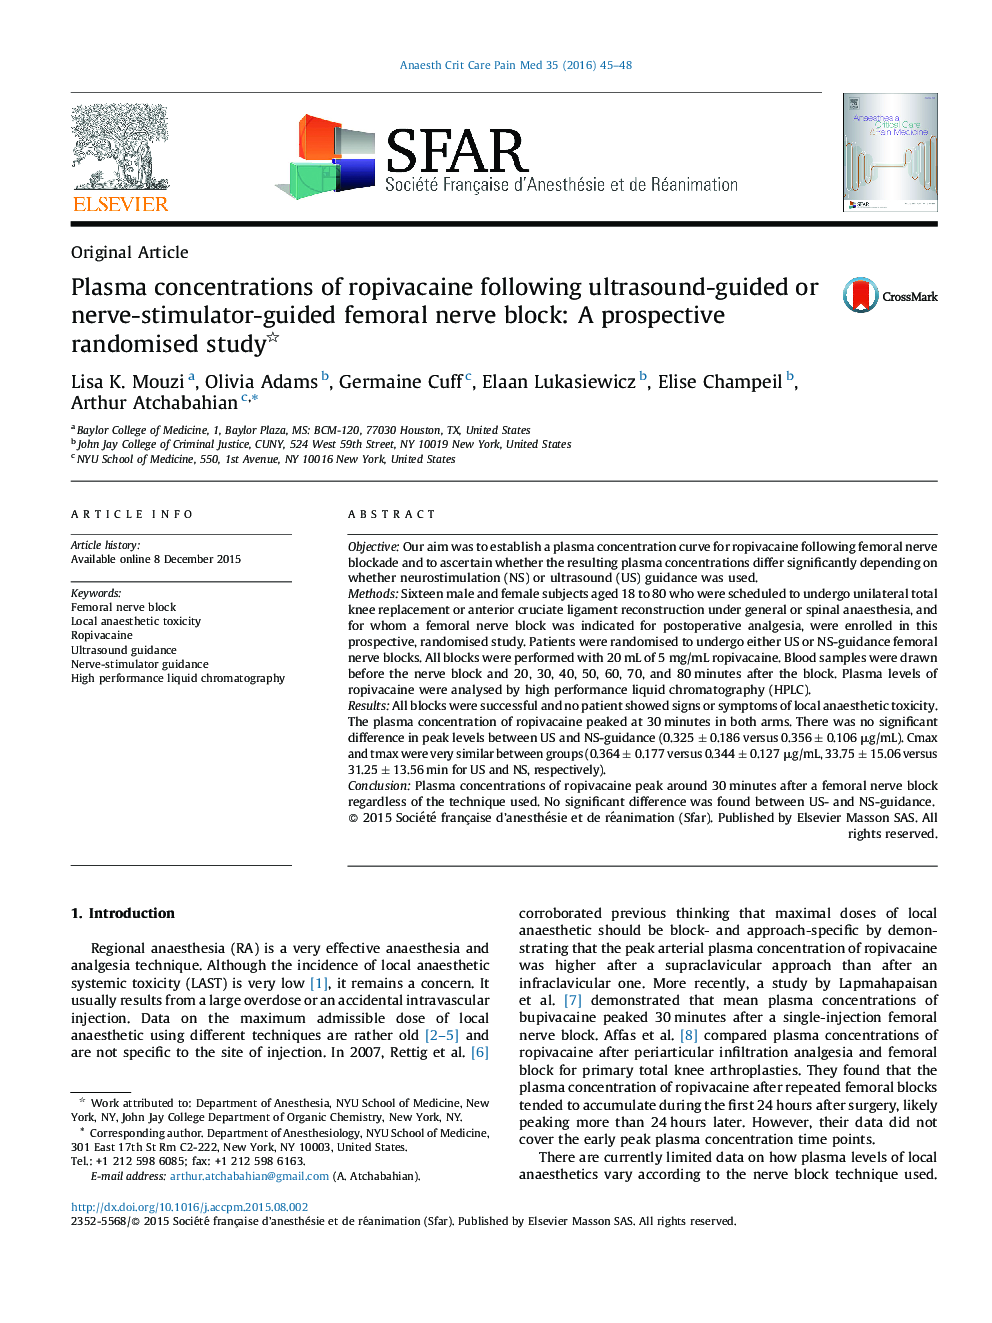 Plasma concentrations of ropivacaine following ultrasound-guided or nerve-stimulator-guided femoral nerve block: A prospective randomised study 